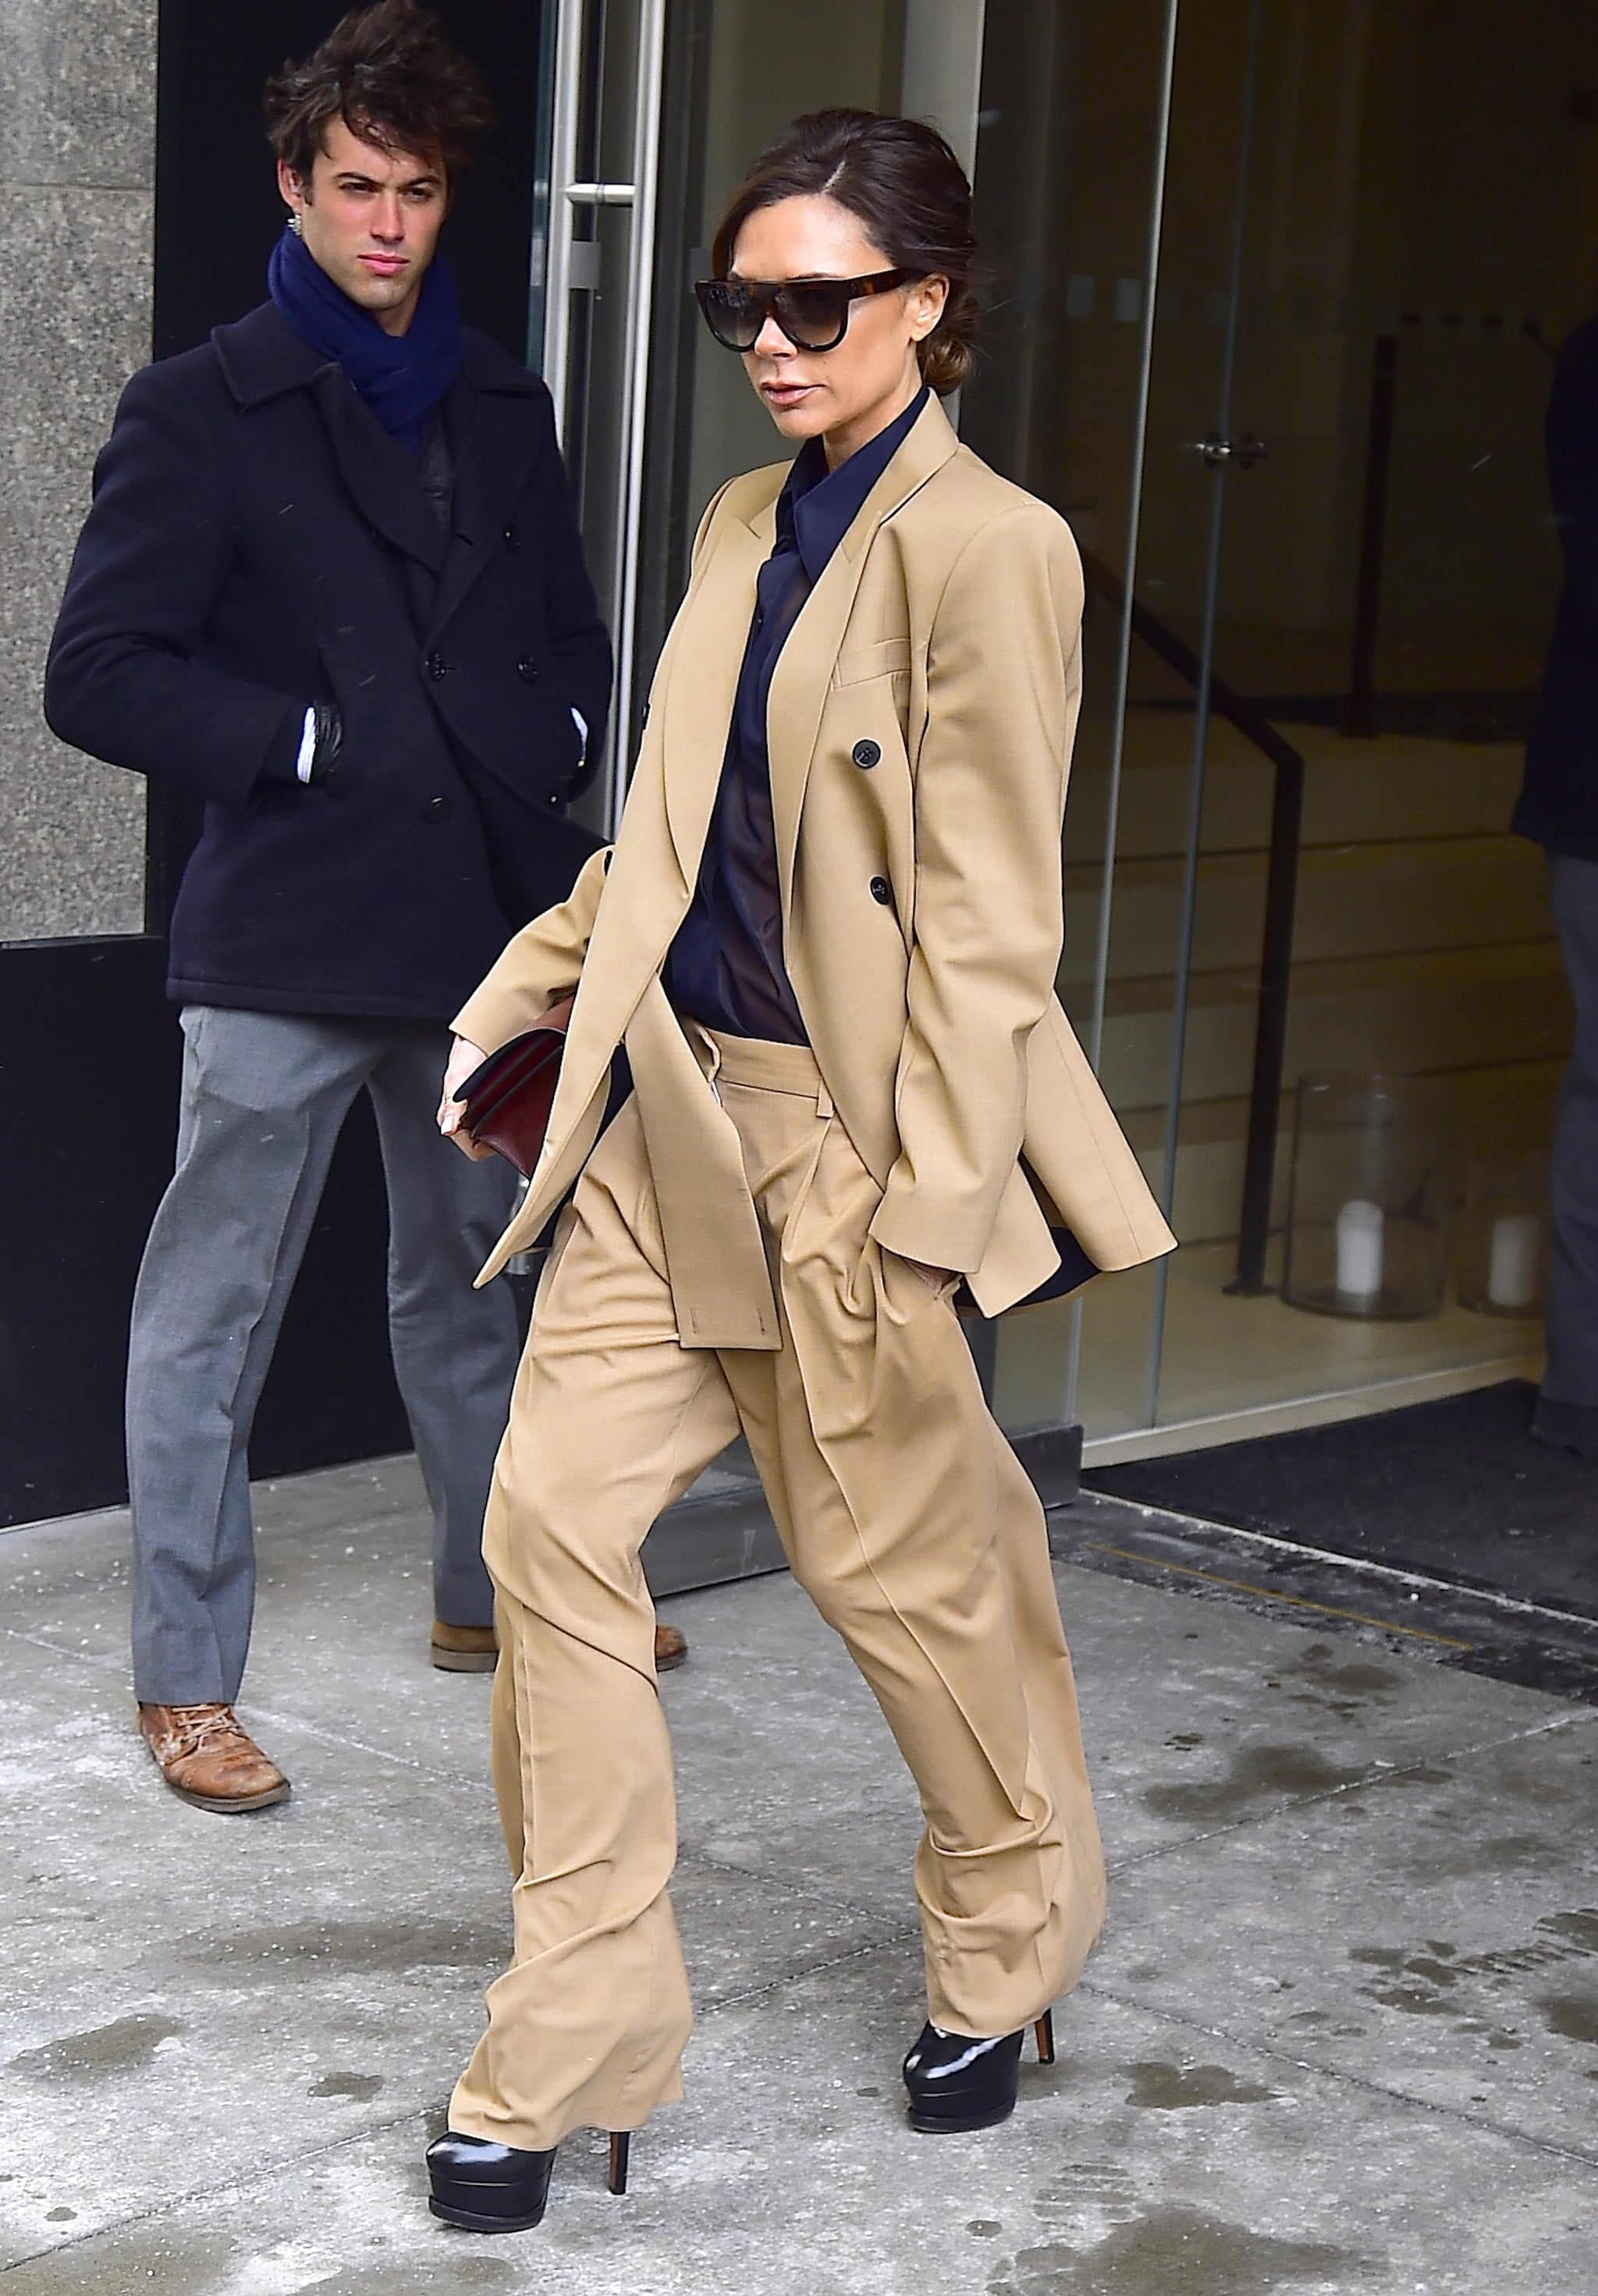 If Her Entire Outfit Looked Familiar | Victoria Beckham Dared to Wear These  Sky-High Heels in Winter | POPSUGAR Fashion Photo 4